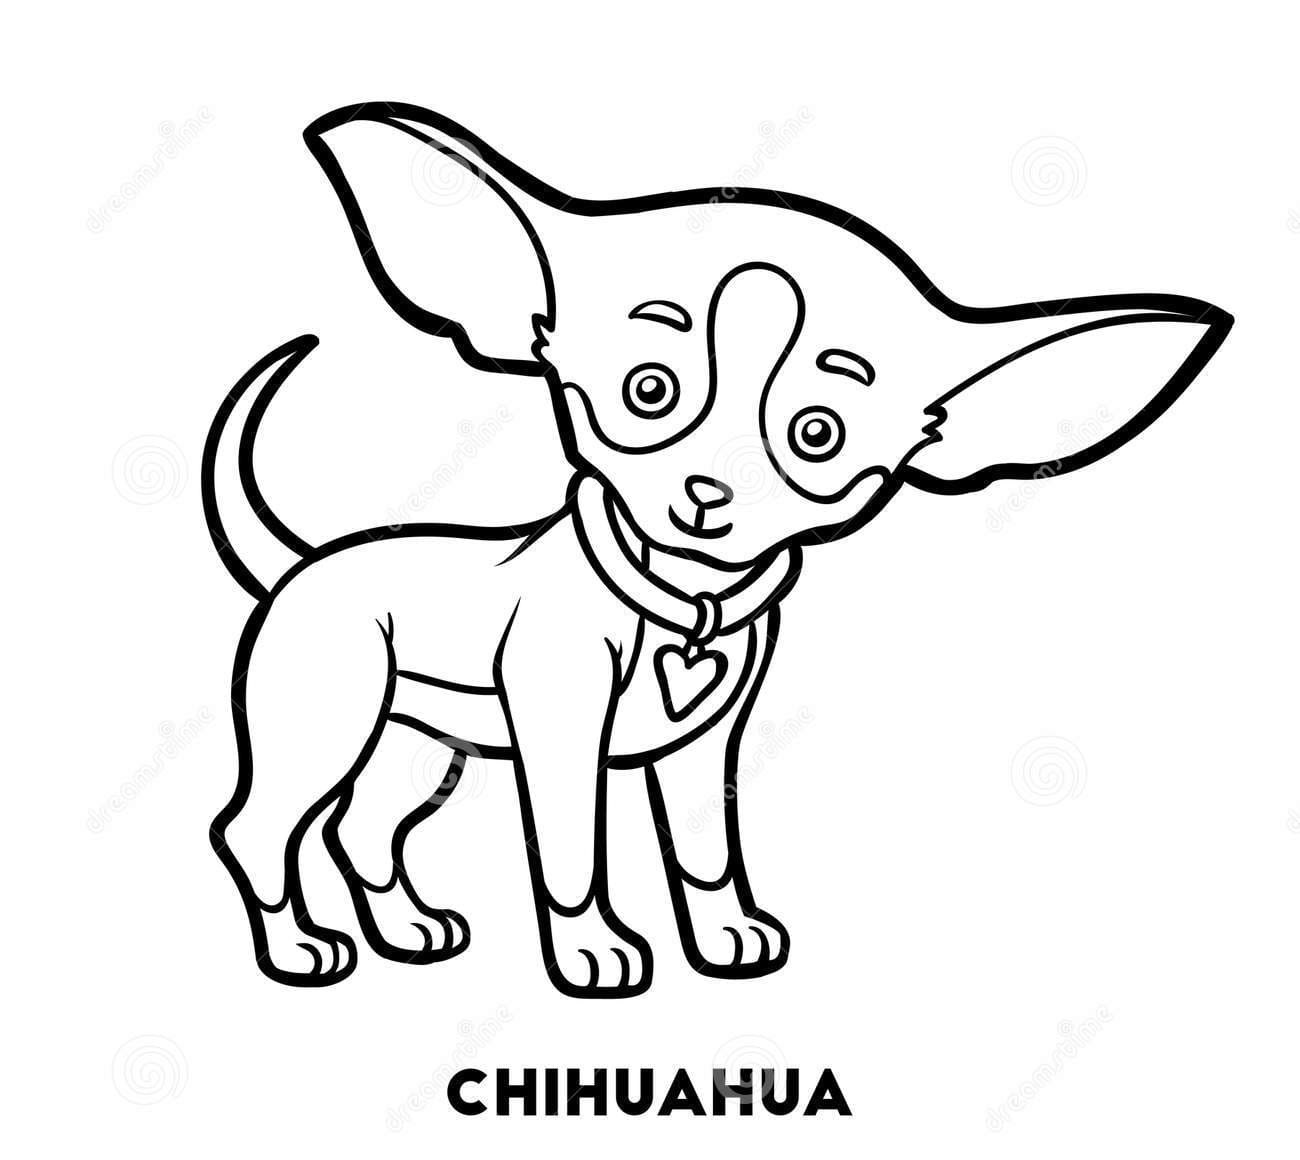 Chihuahua Very Cute Coloring Page